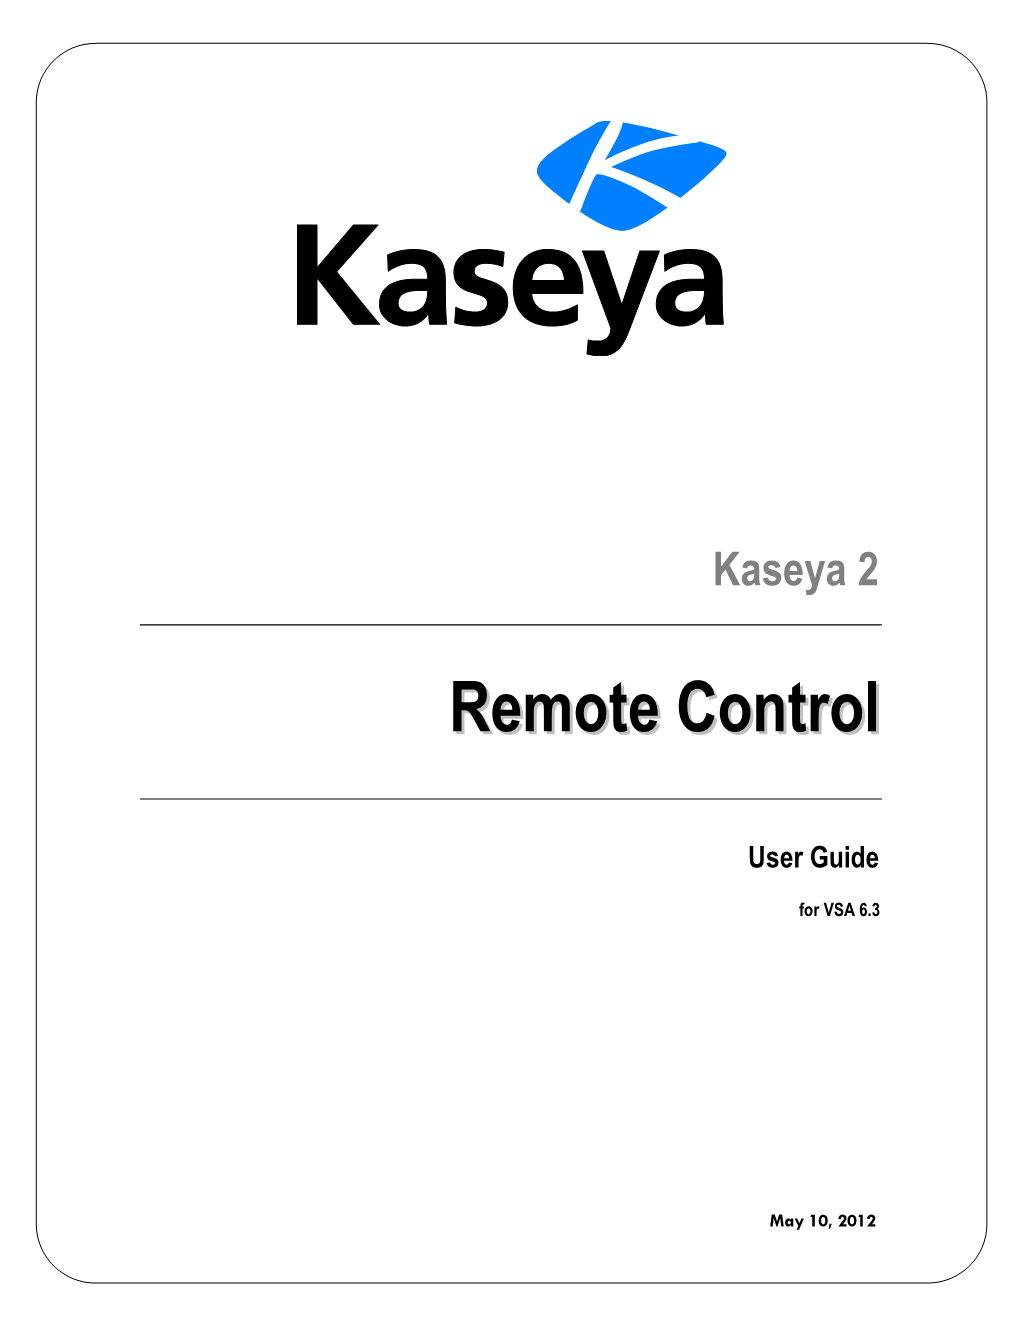 Remote Control Overview